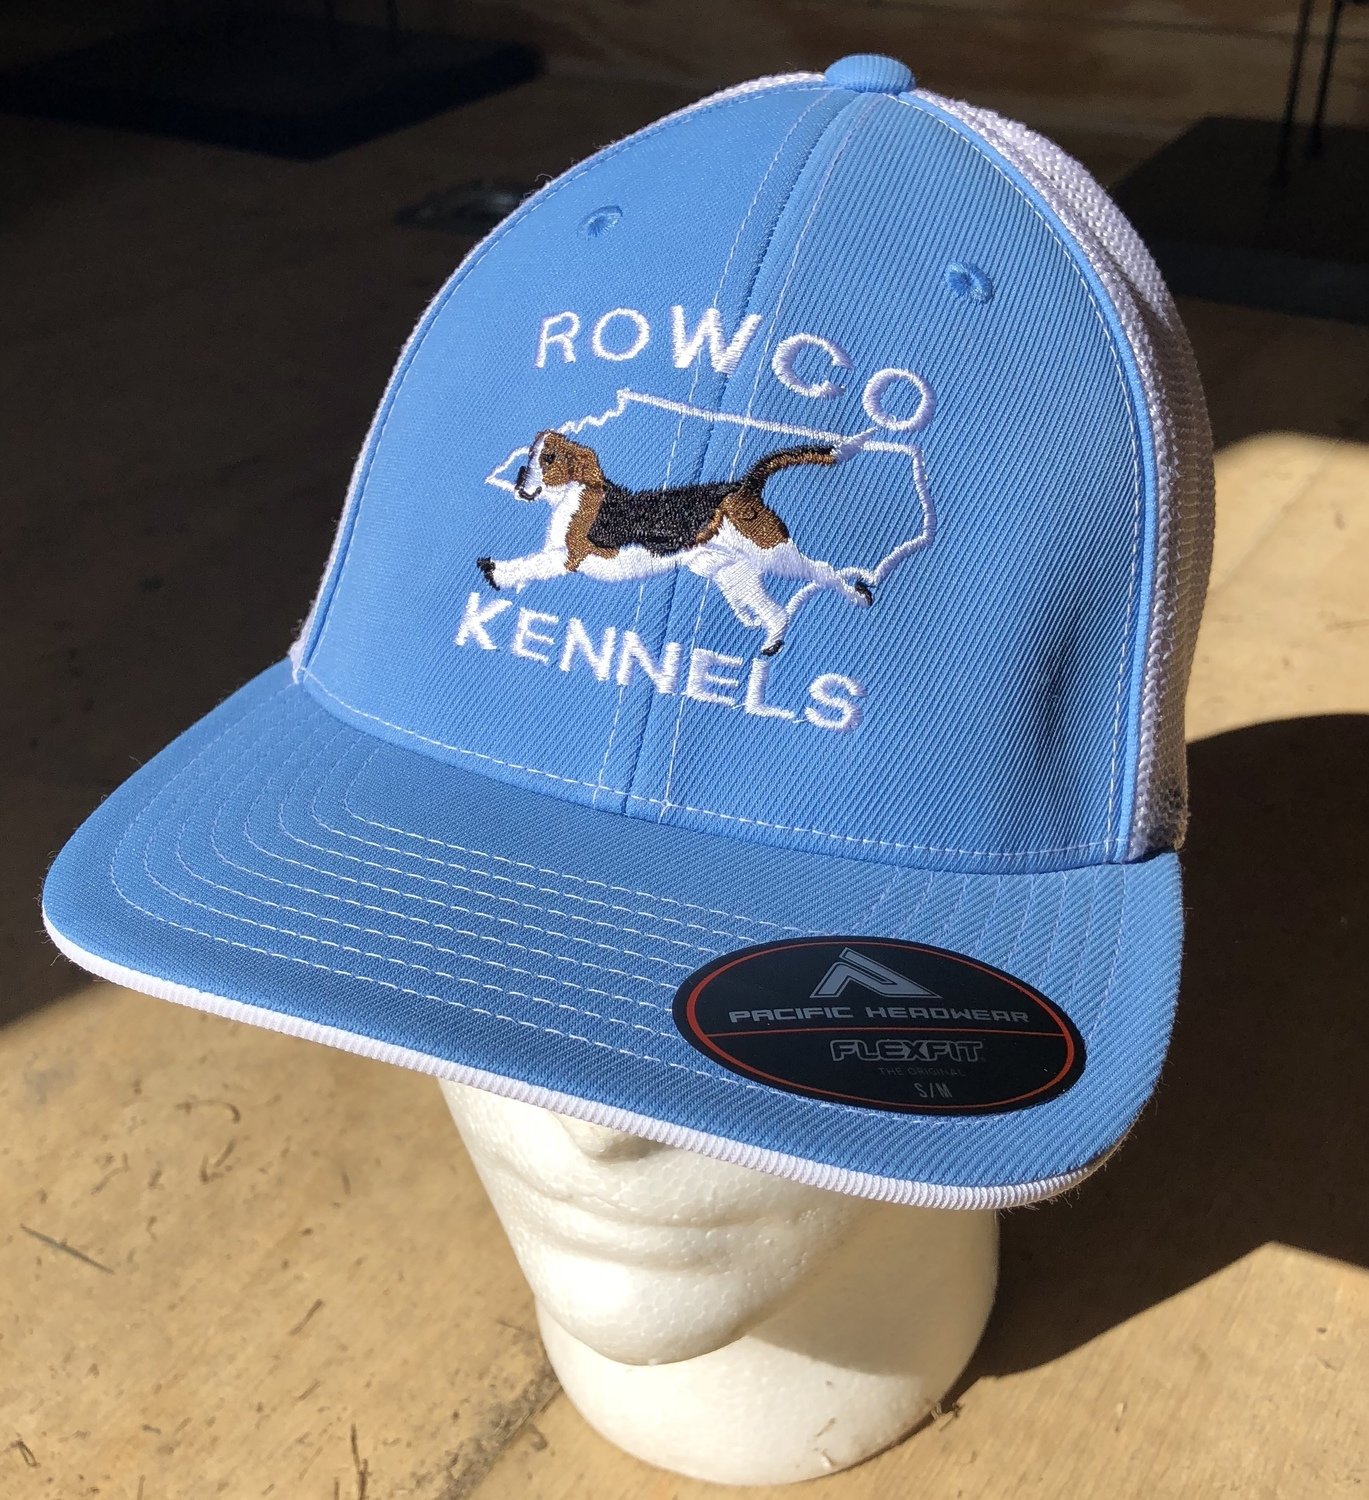 Running Tri-Beagle with State Adjustable Custom Hat - All 50 States & 44 Hat Colors Available!!!